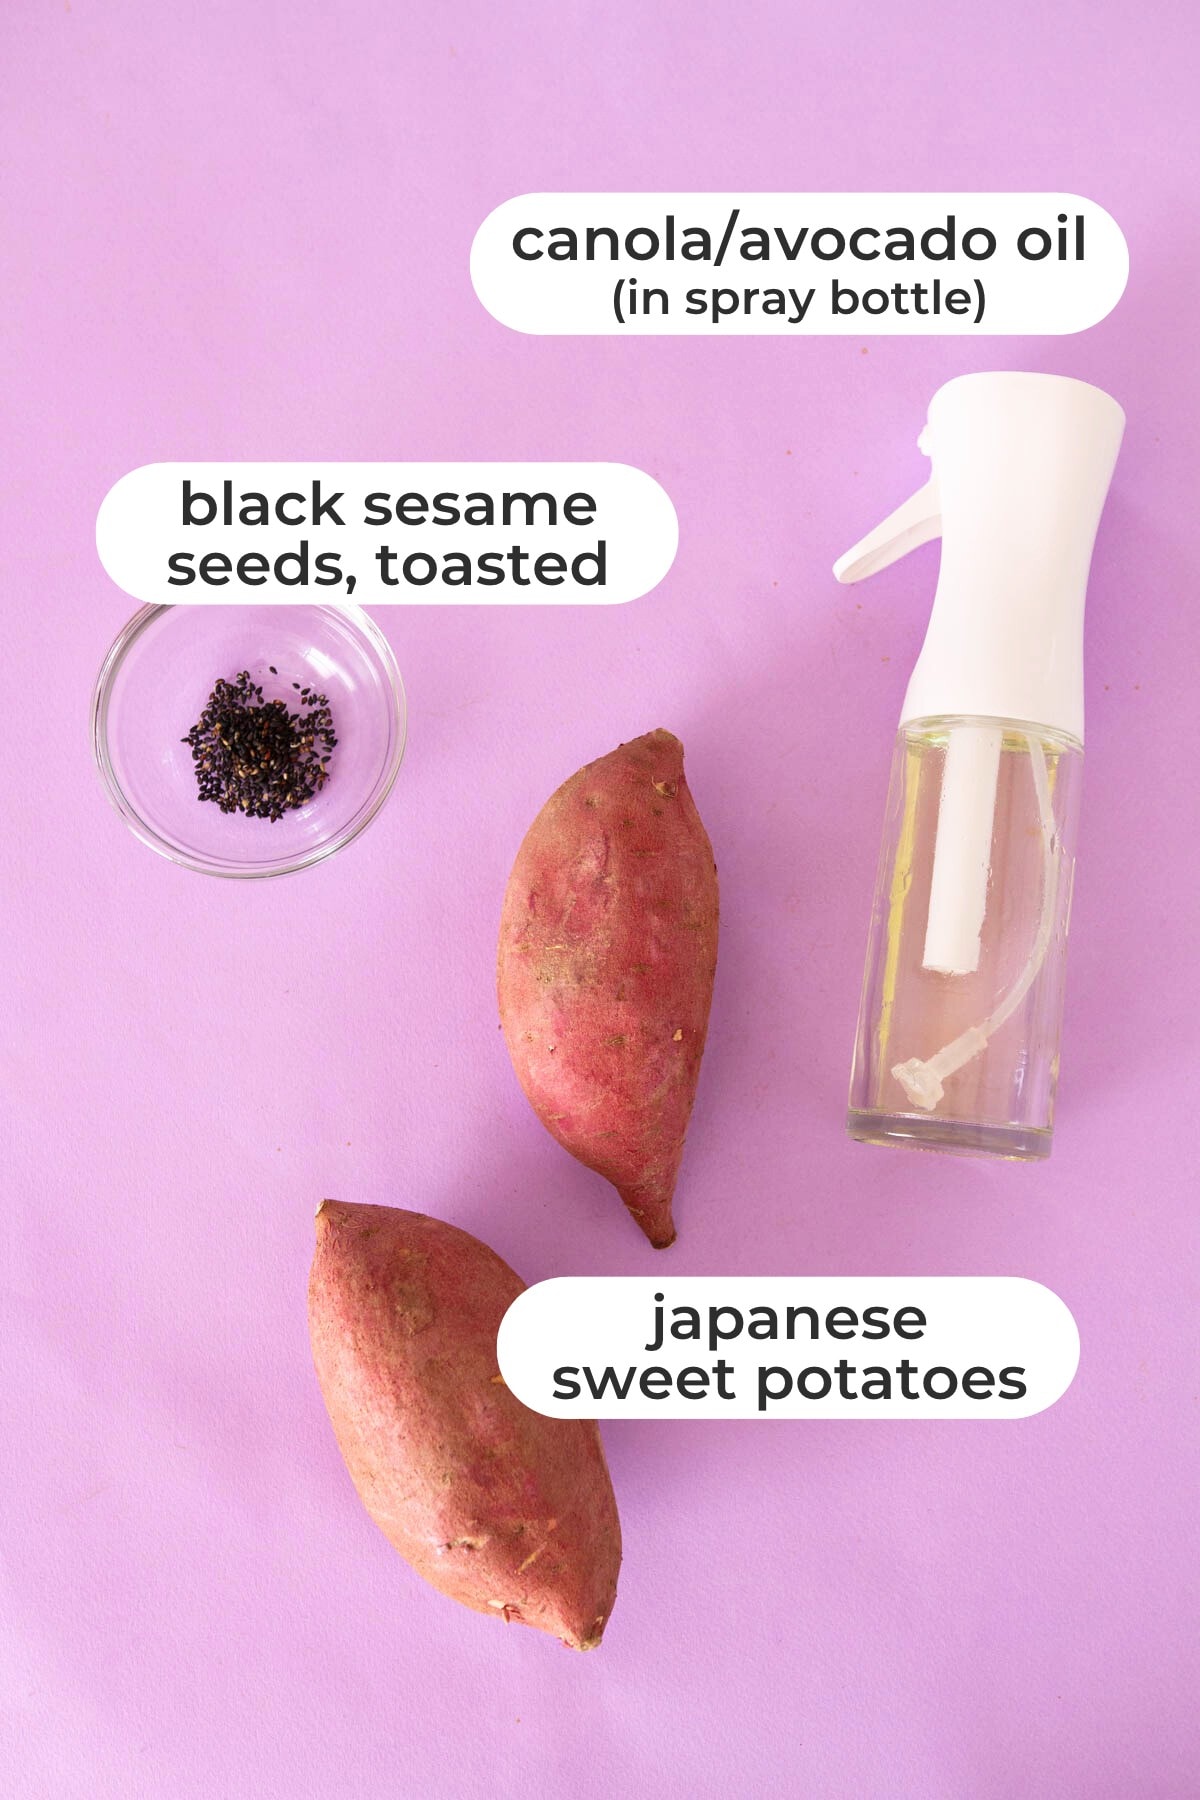 Labeled ingredients for air fryer roasted Japanese sweet potatoes over a purple background, including canola/avocado oil (in a spray bottle), toasted black sesame seeds, and Japanese sweet potatoes.